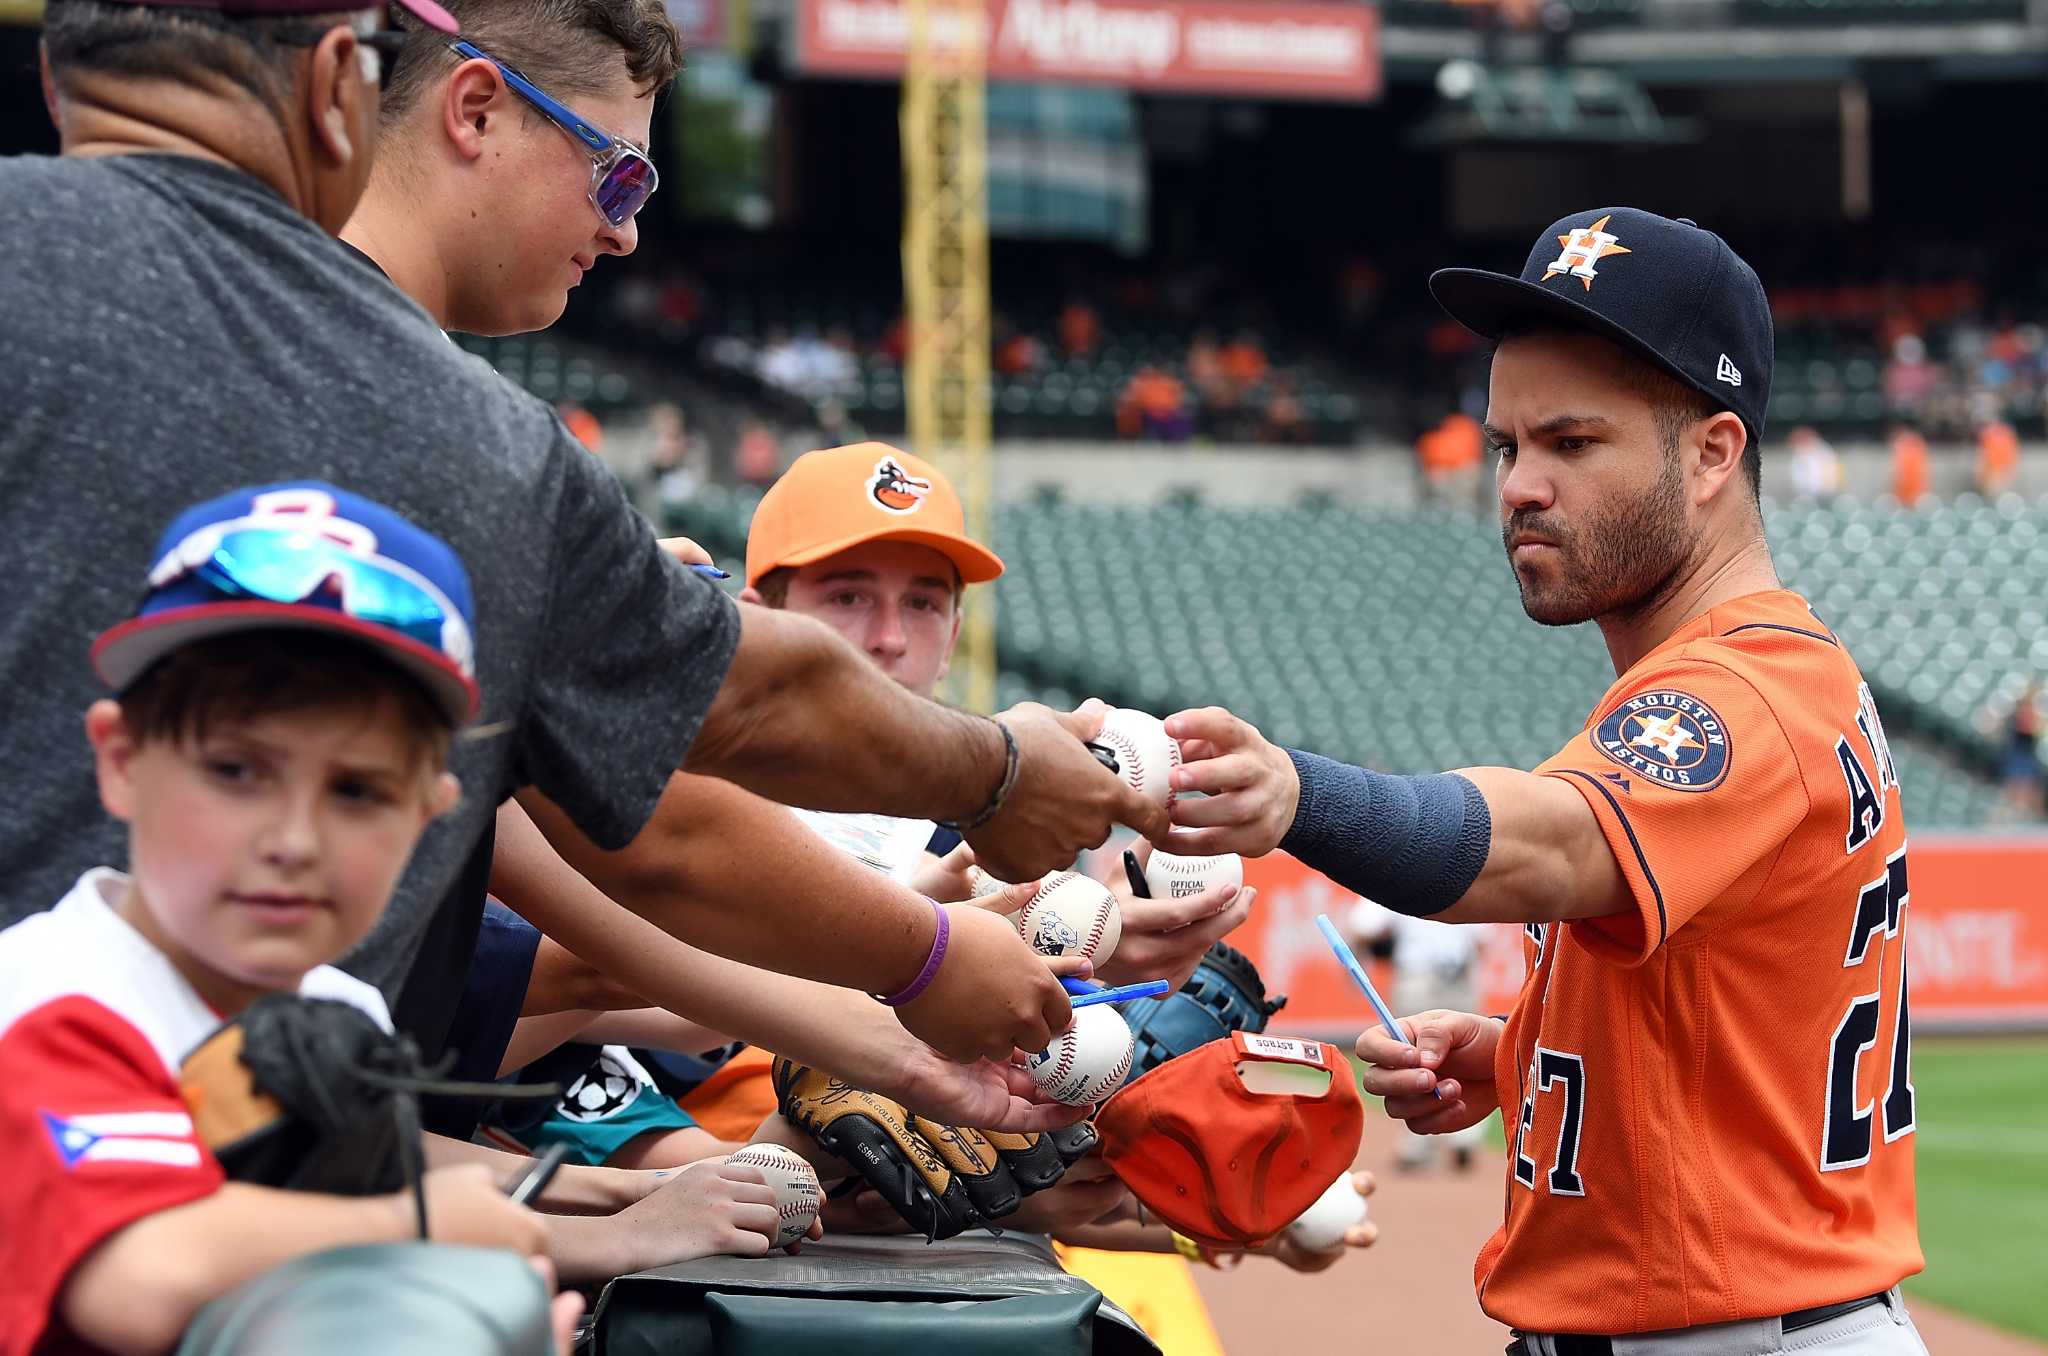 Houston Astros fan gets Lance McCullers autograph tattooed - ABC13 Houston